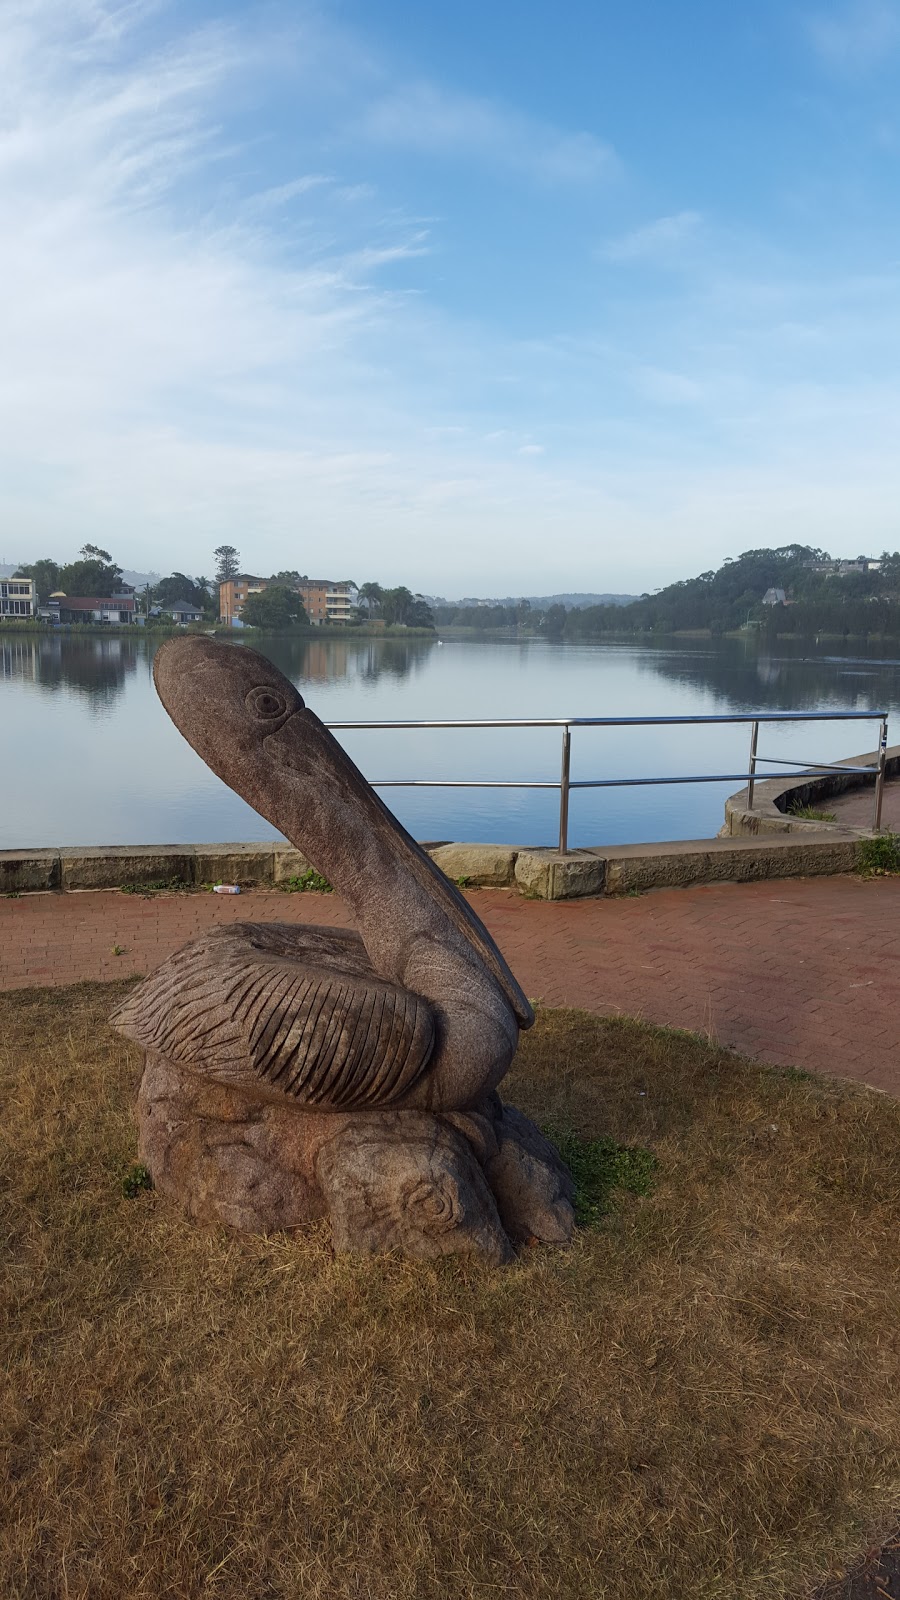 Narrabeen Lagoon State Park | park | Narrabeen Lakes, New South Wales, Narrabeen NSW 2101, Australia